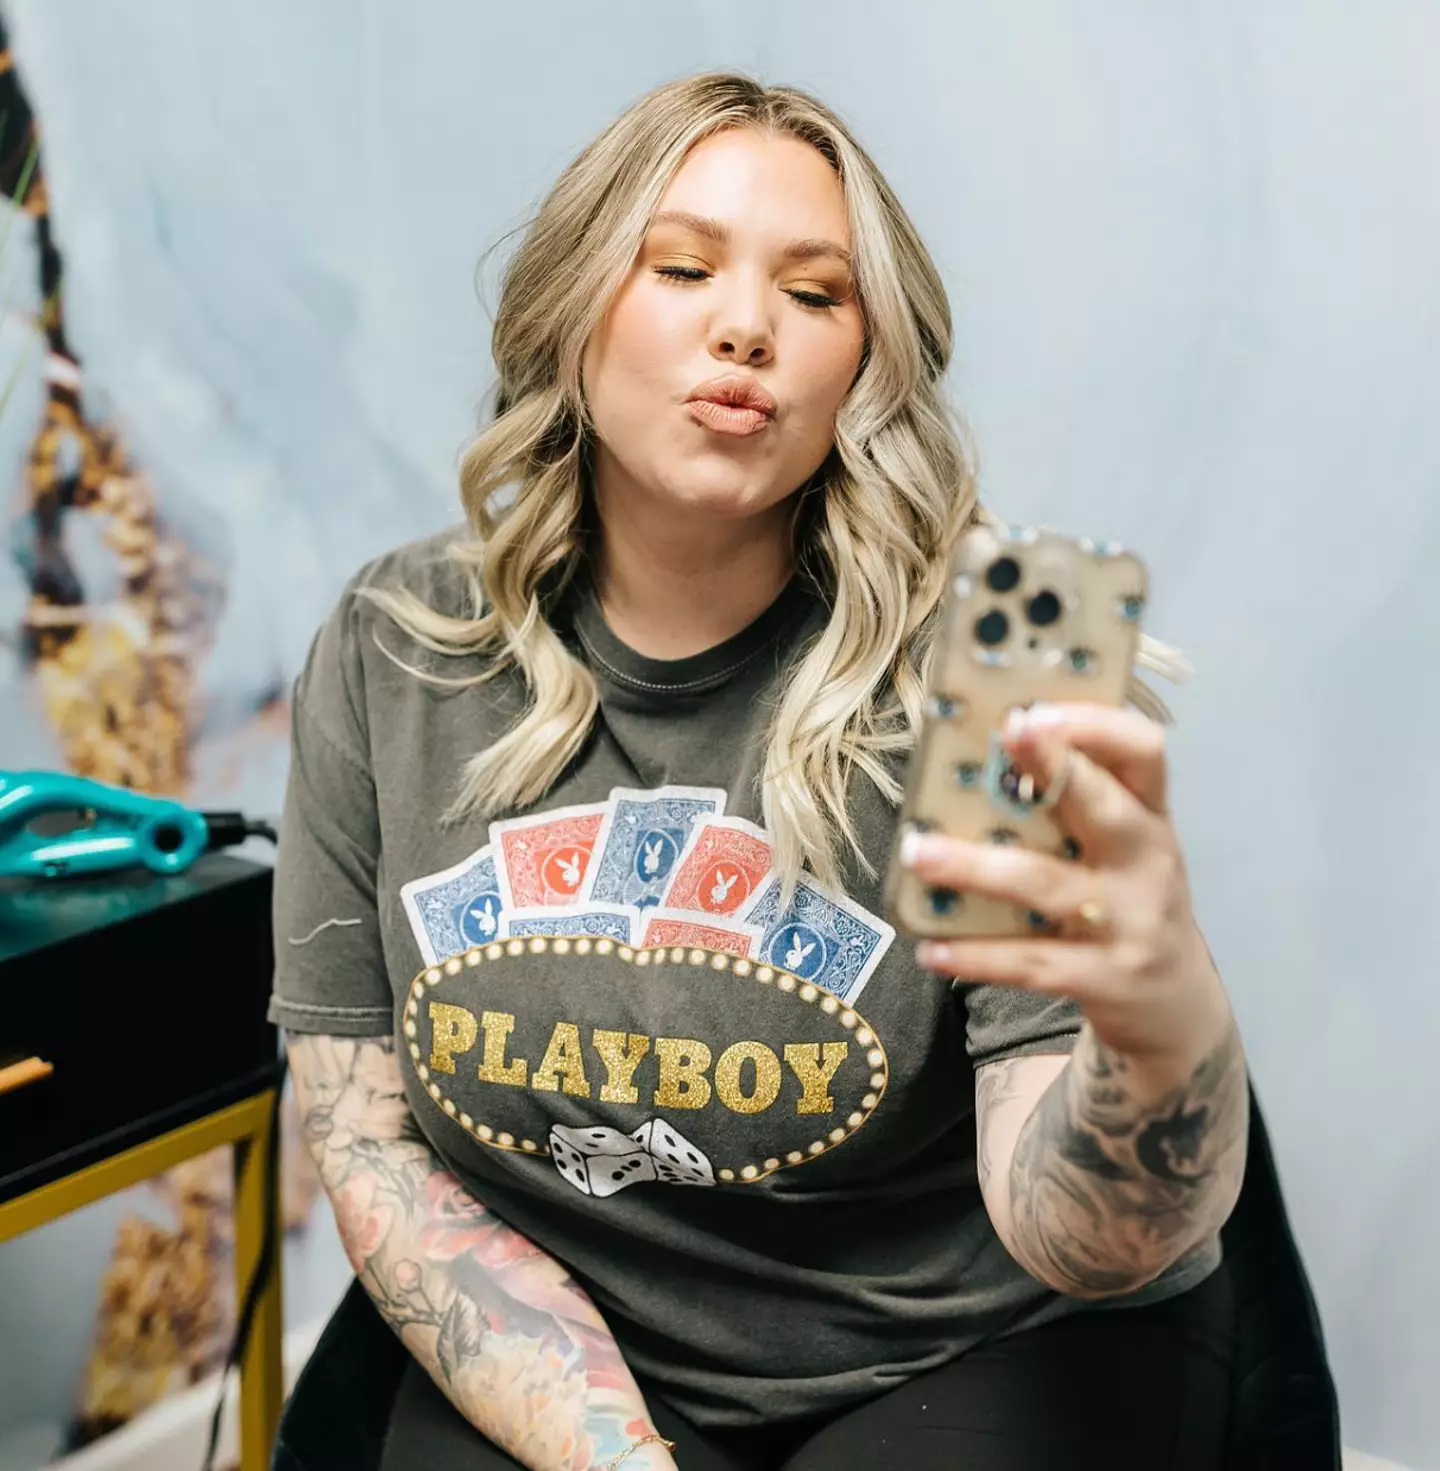 Kailyn, 31, is expecting twins.